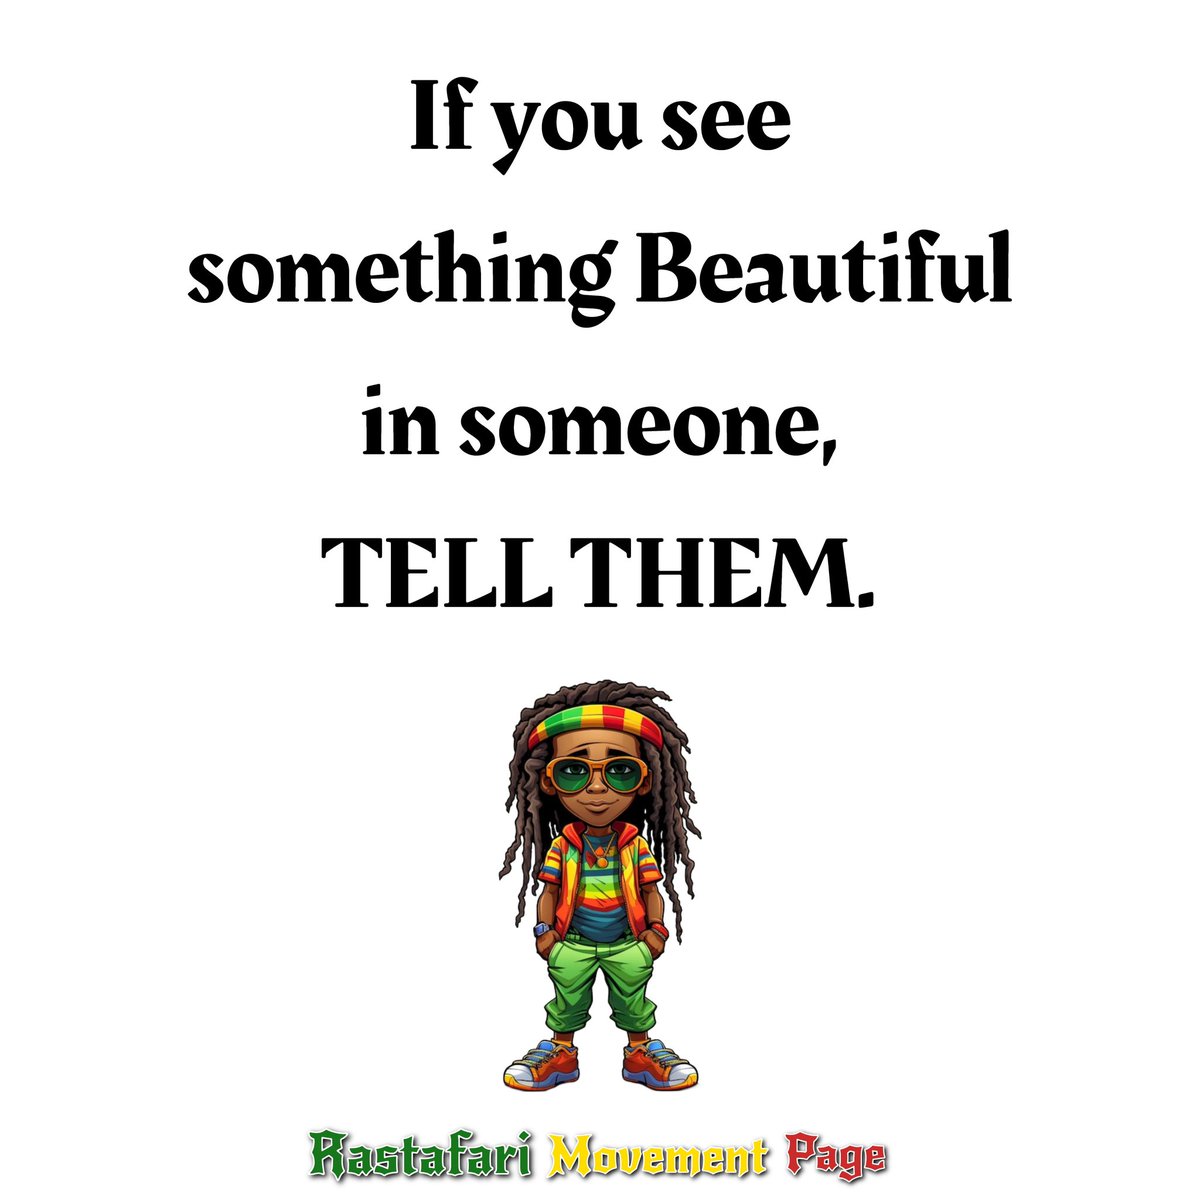 If you see something Beautiful in someone, TELL THEM.